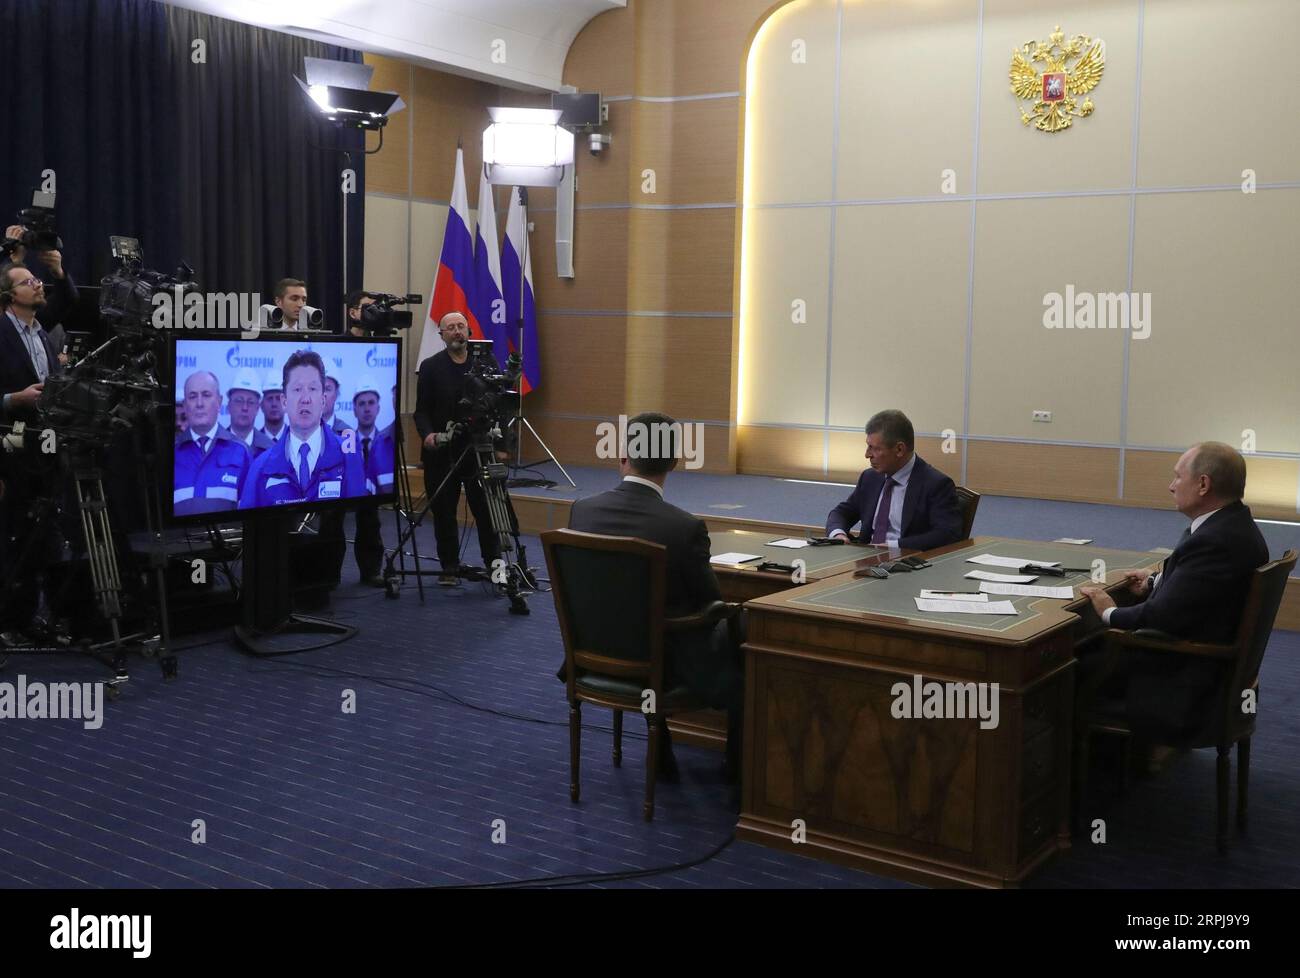 191202 -- BEIJING, Dec. 2, 2019 -- Russian President Vladimir Putin 1st R, Russian Energy Minister Alexander Novak L and Deputy Prime Minister Dmitry Kozak 2nd R watch the launching ceremony of the China-Russia east-route natural gas pipeline via teleconference in Sochi, Russia, Dec. 2, 2019. /Handout via Xinhua Xinhua Headlines: China-Russia east-route natural gas pipeline operational Sputnik PUBLICATIONxNOTxINxCHN Stock Photo